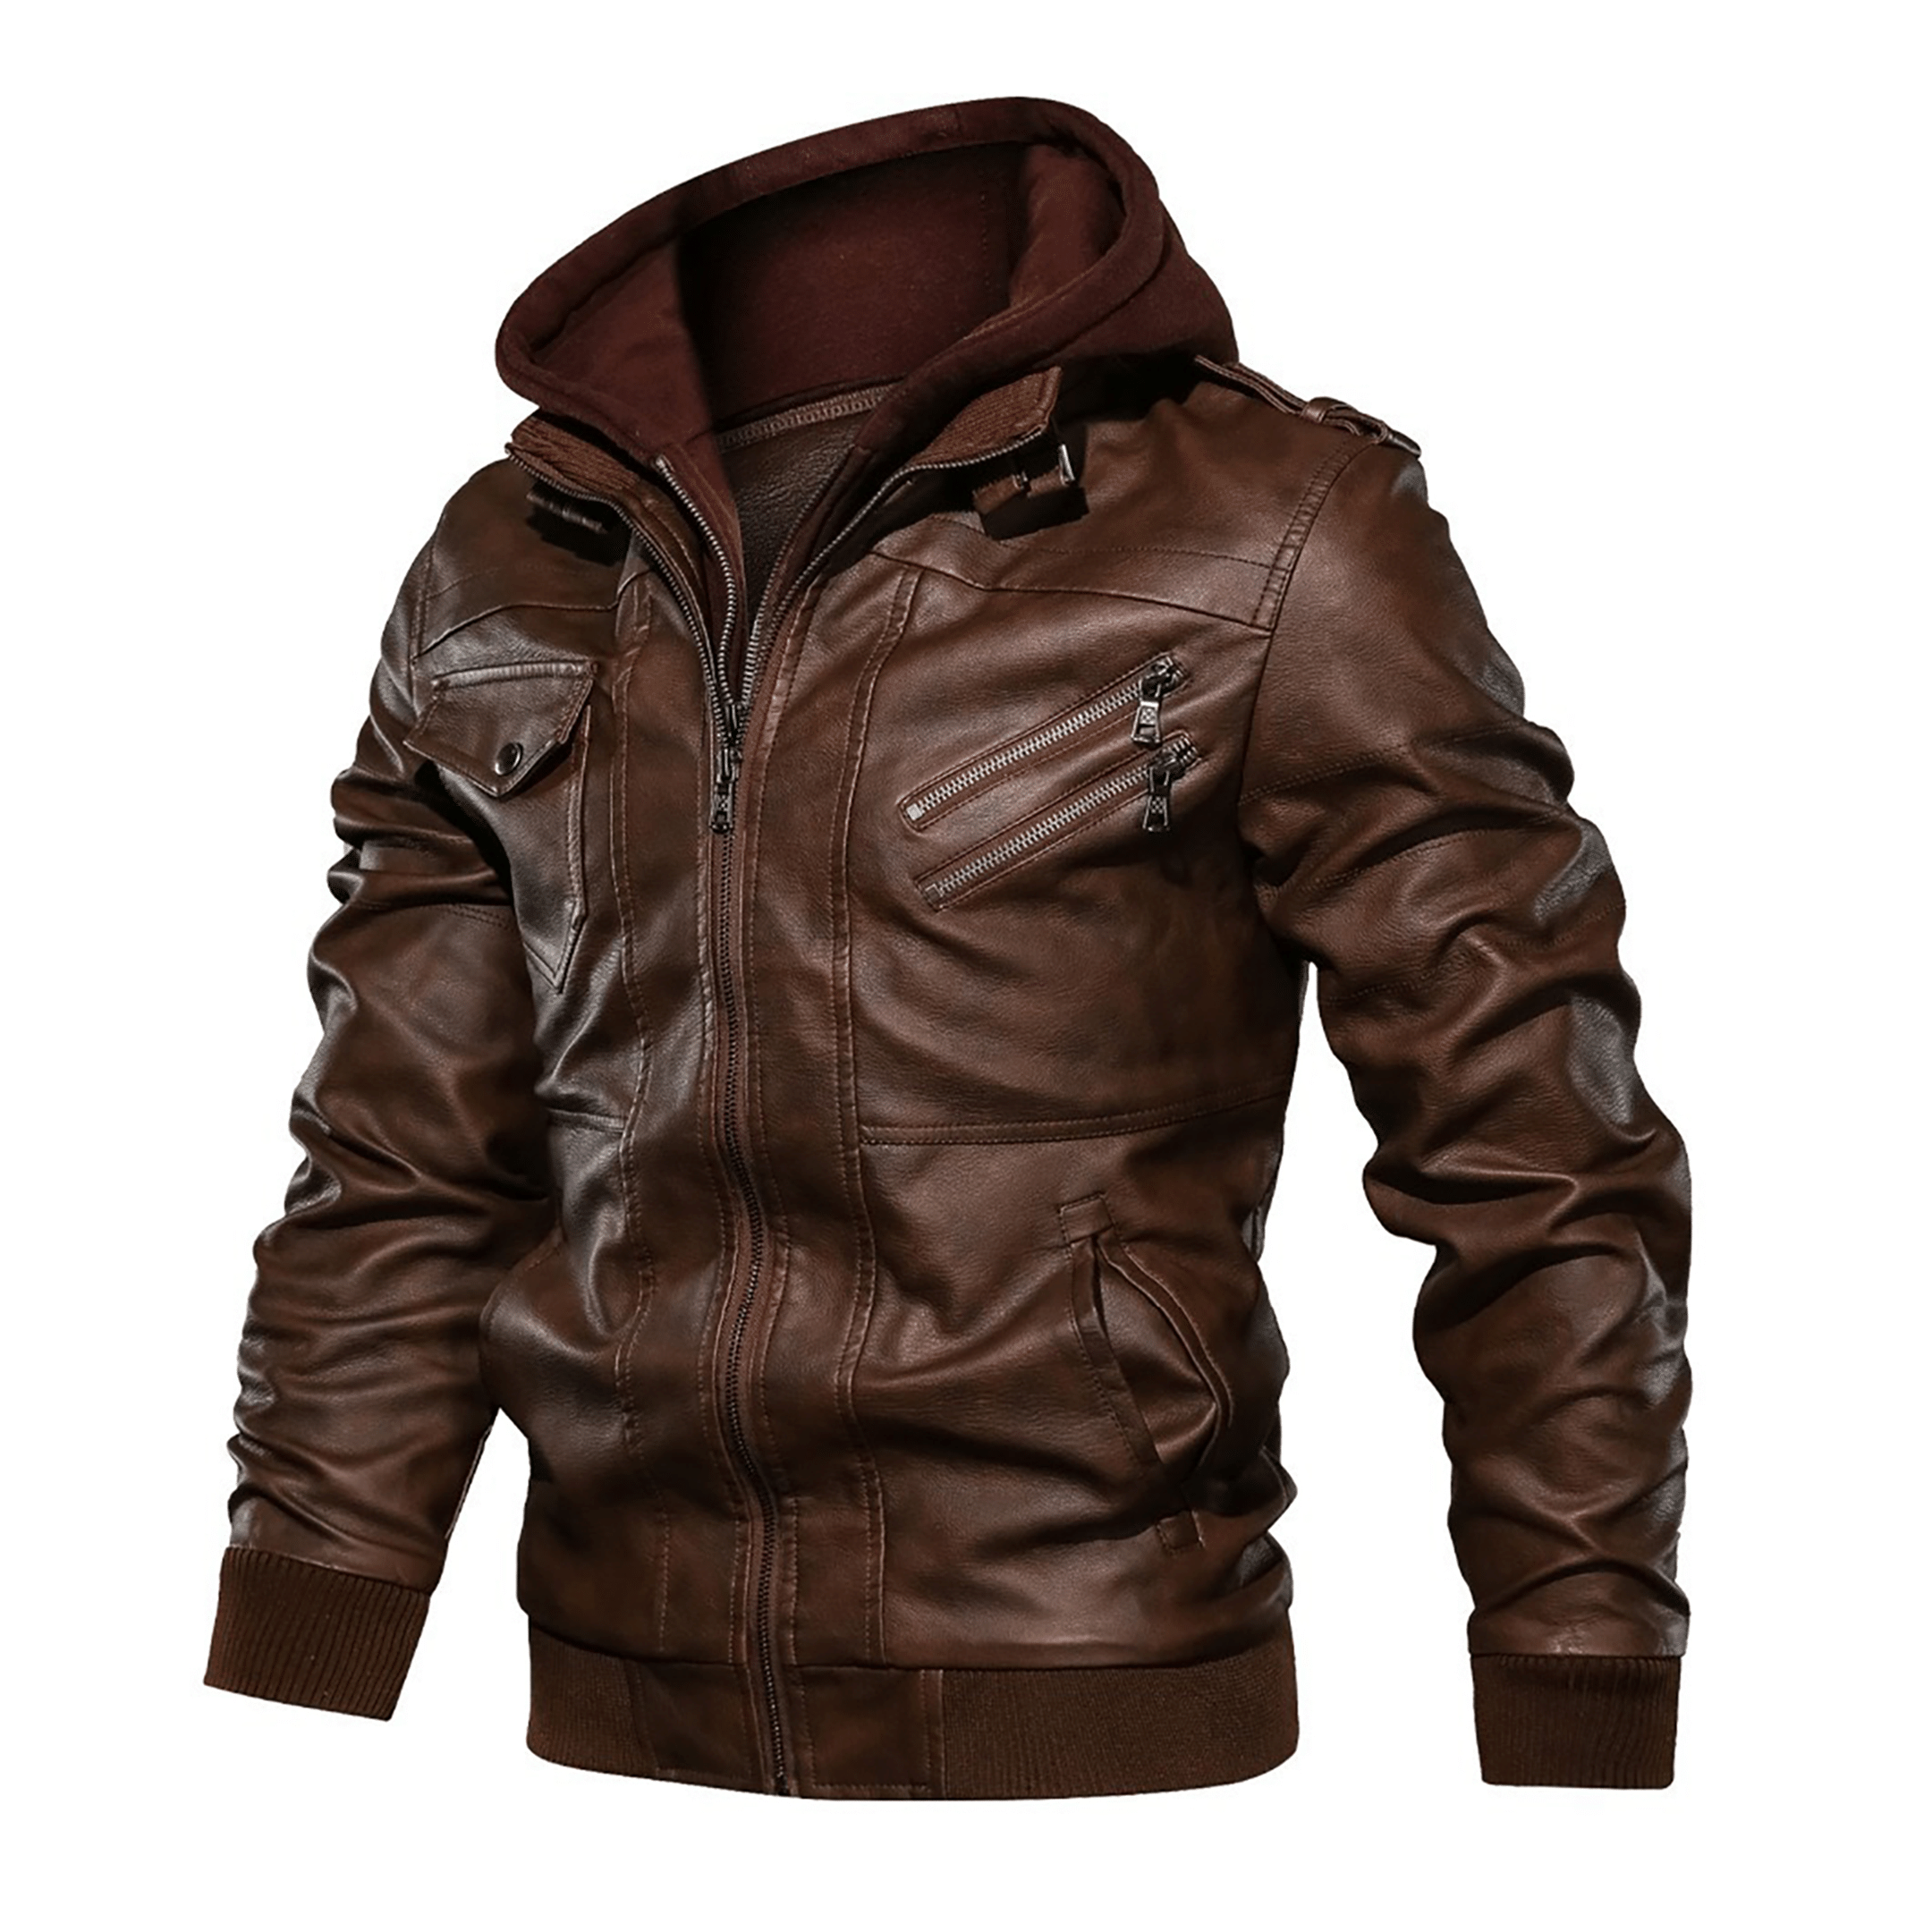 Top leather jackets and latest products 111